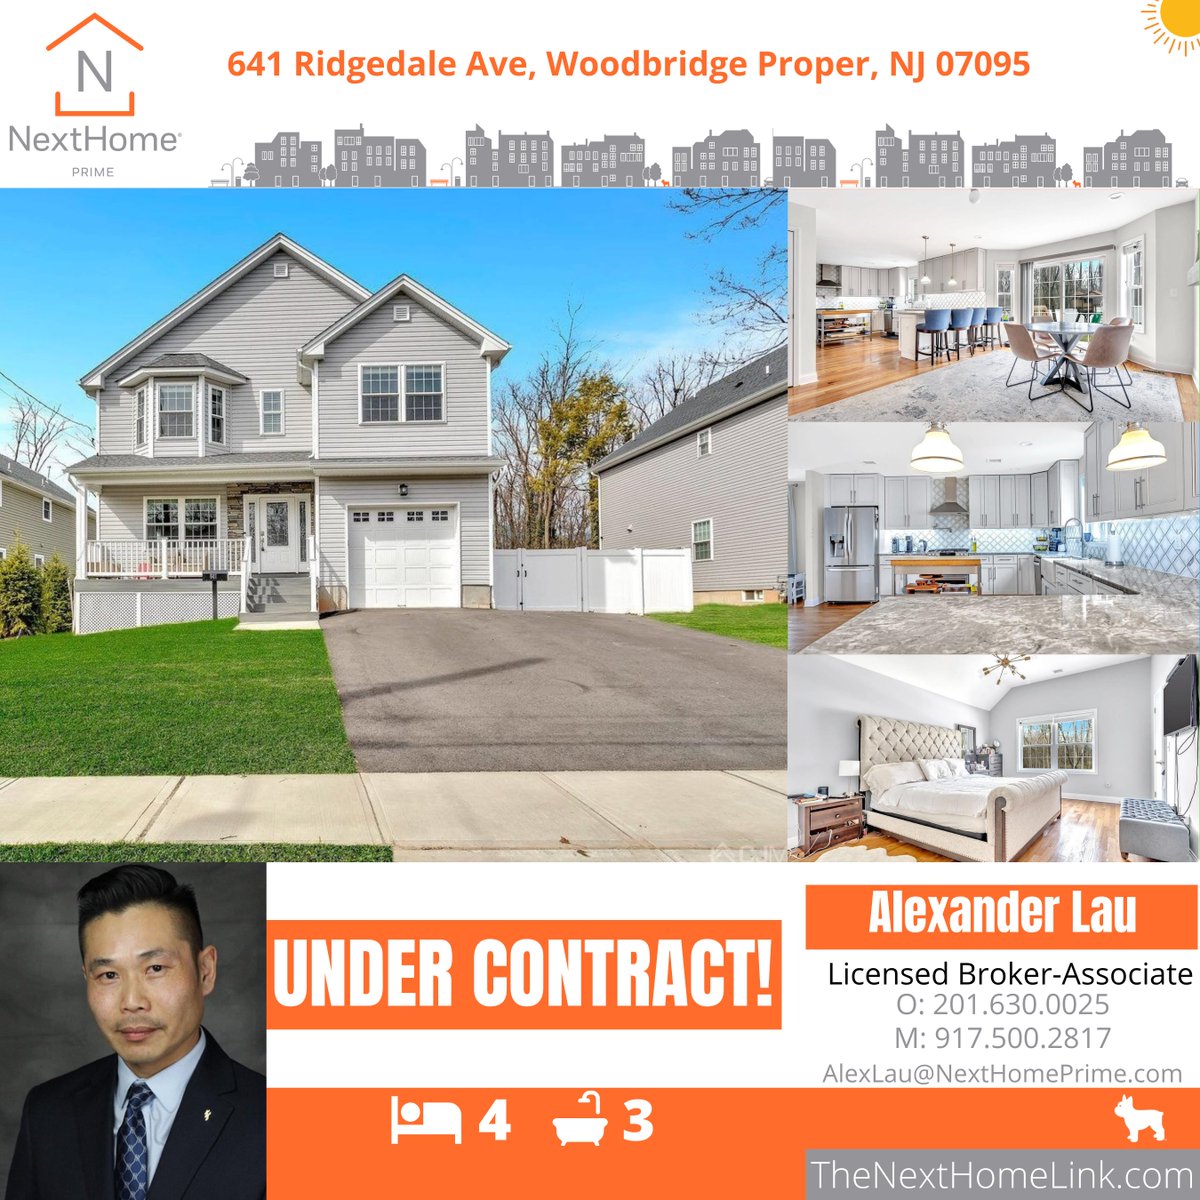 We are now UNDER CONTRACT at 641 Ridgedale Ave, Woodbridge Proper, NJ 07095!

#NextHomePrime #NextHome #UnderContract #RealEstate #Realtor #Market #WhosNext #NewJersey #NJ #DreamHome #Home #NewHome #Property #AlexLau #HomeForSale #ForSale #RealEstateForSale #MiddlesexCounty